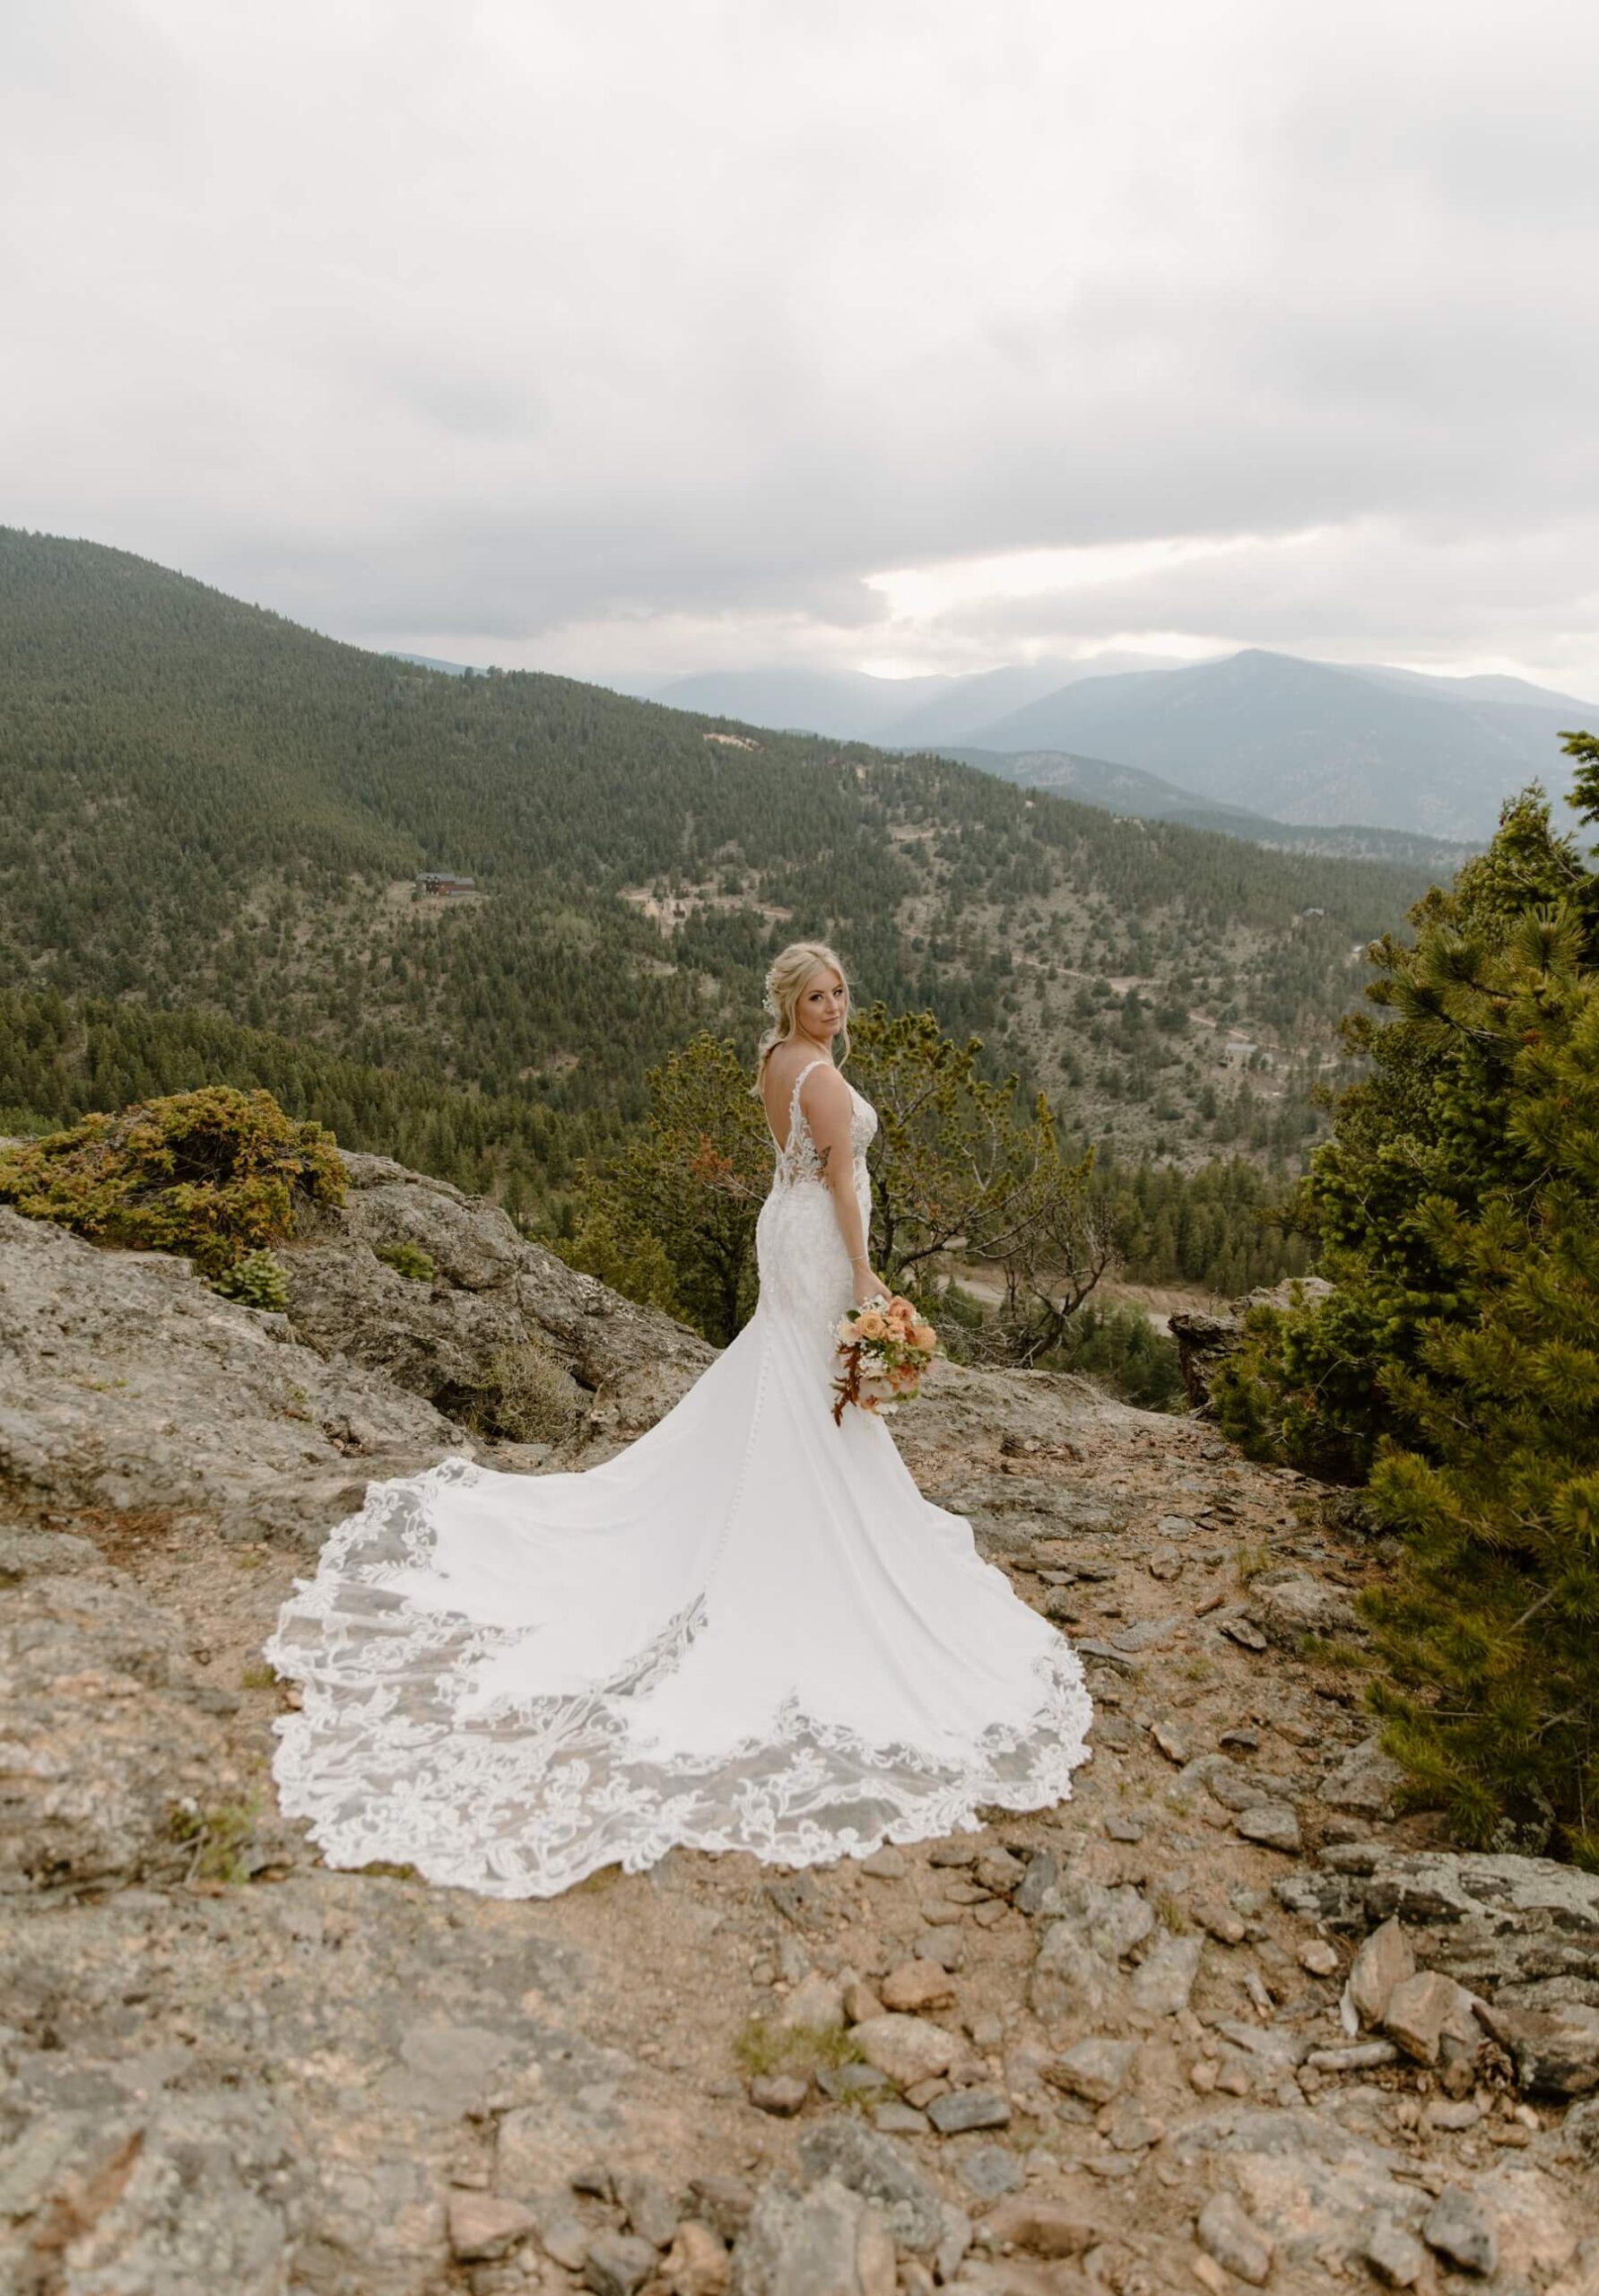 Bride with train extended behind her standing in front of mountains at idaho springs wedding venue | McArthur Weddings and Events